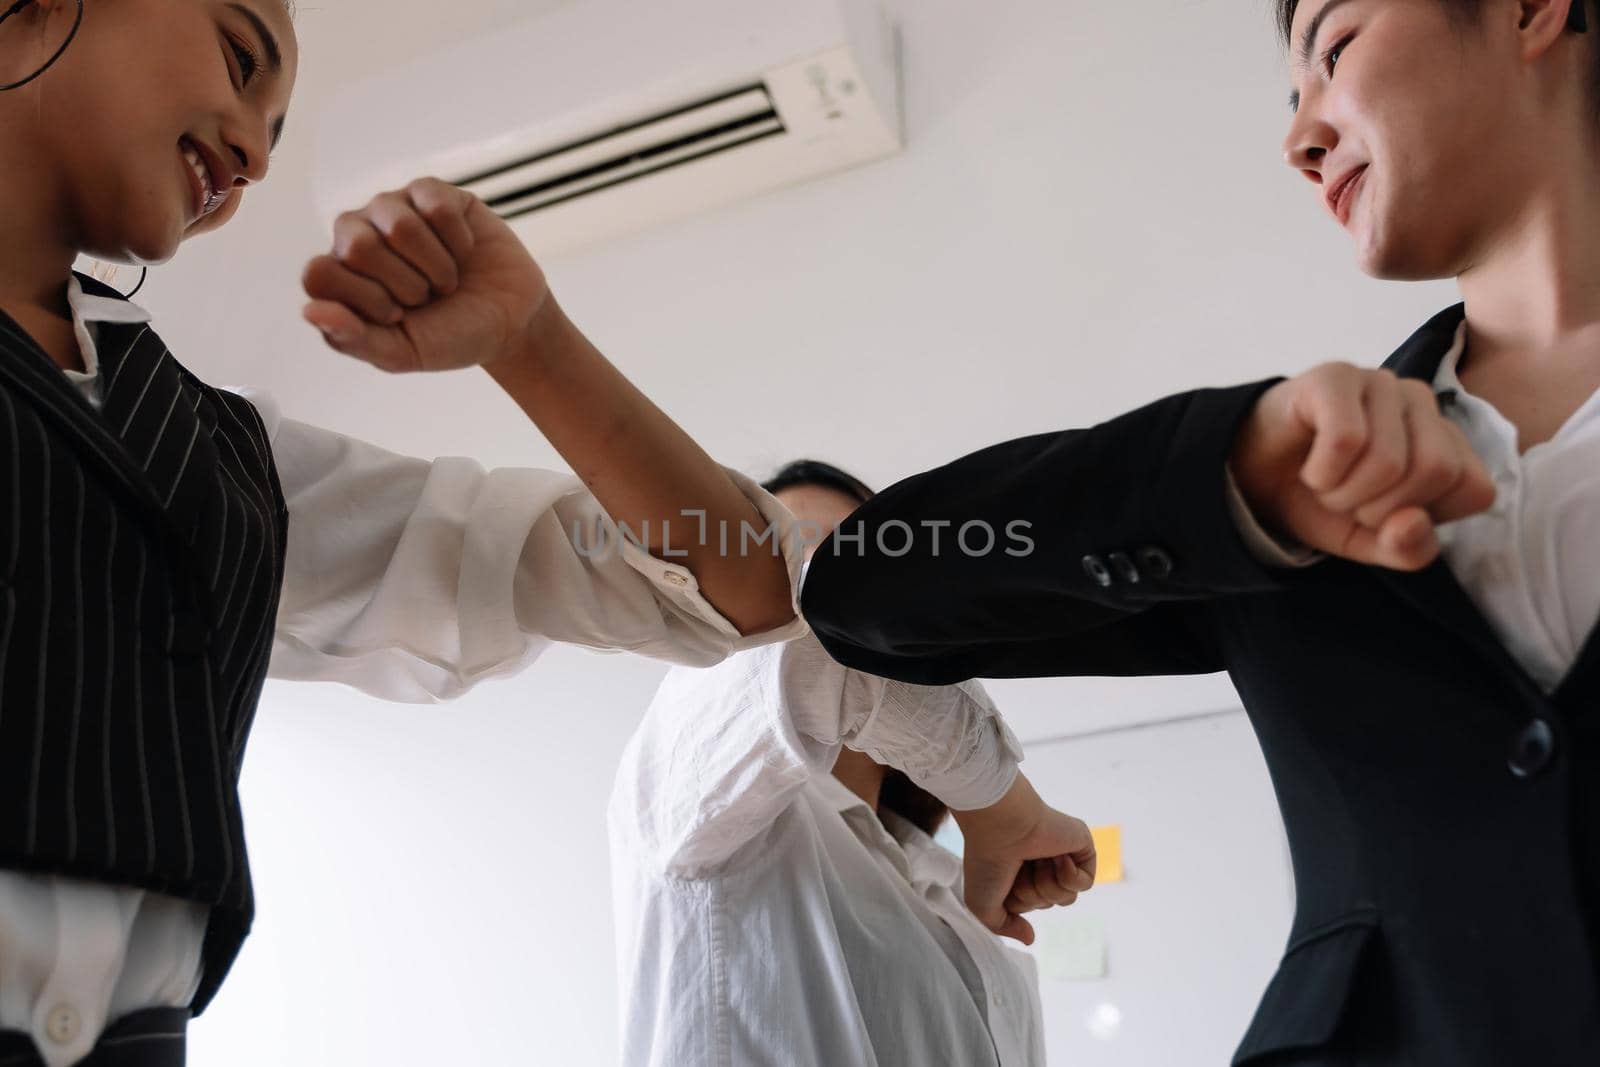 Group of business greeting bumping elbows at workplace, happy coworkers in medical facial covers protect from COVID-19 pandemics, healthcare concept. by nateemee